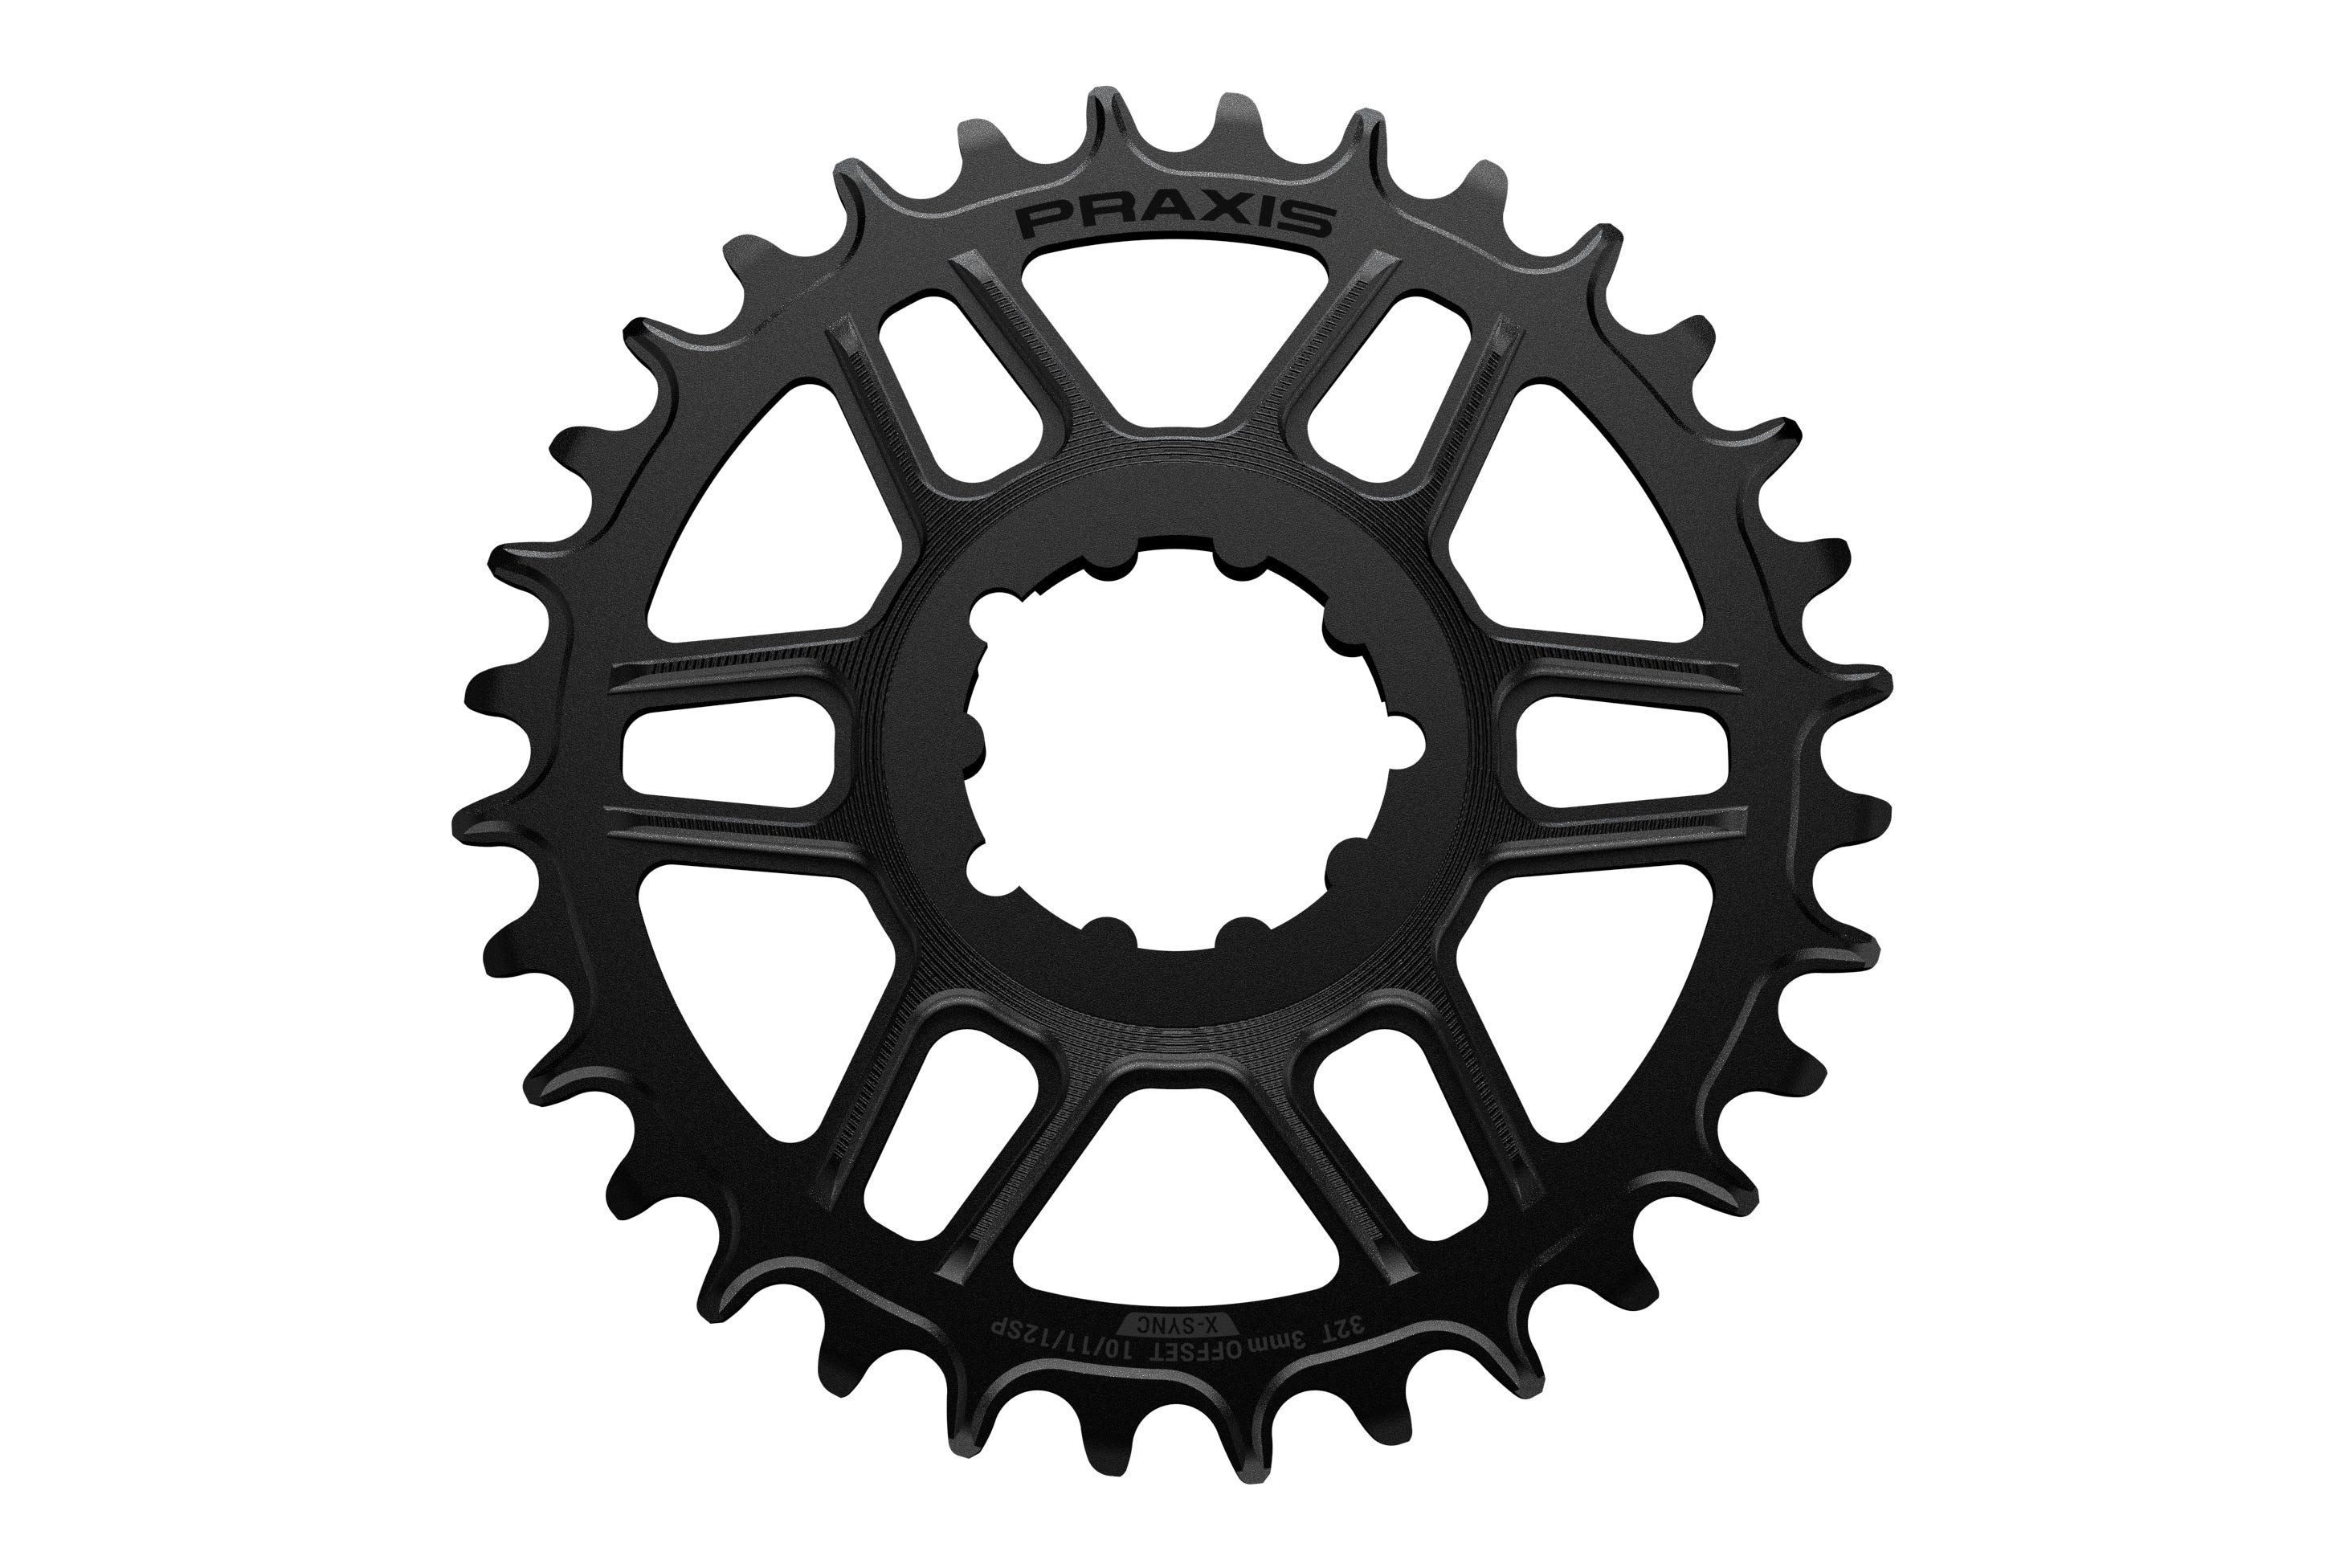 Praxis MTN Direct Mount 1x Chainring (wide/narrow)